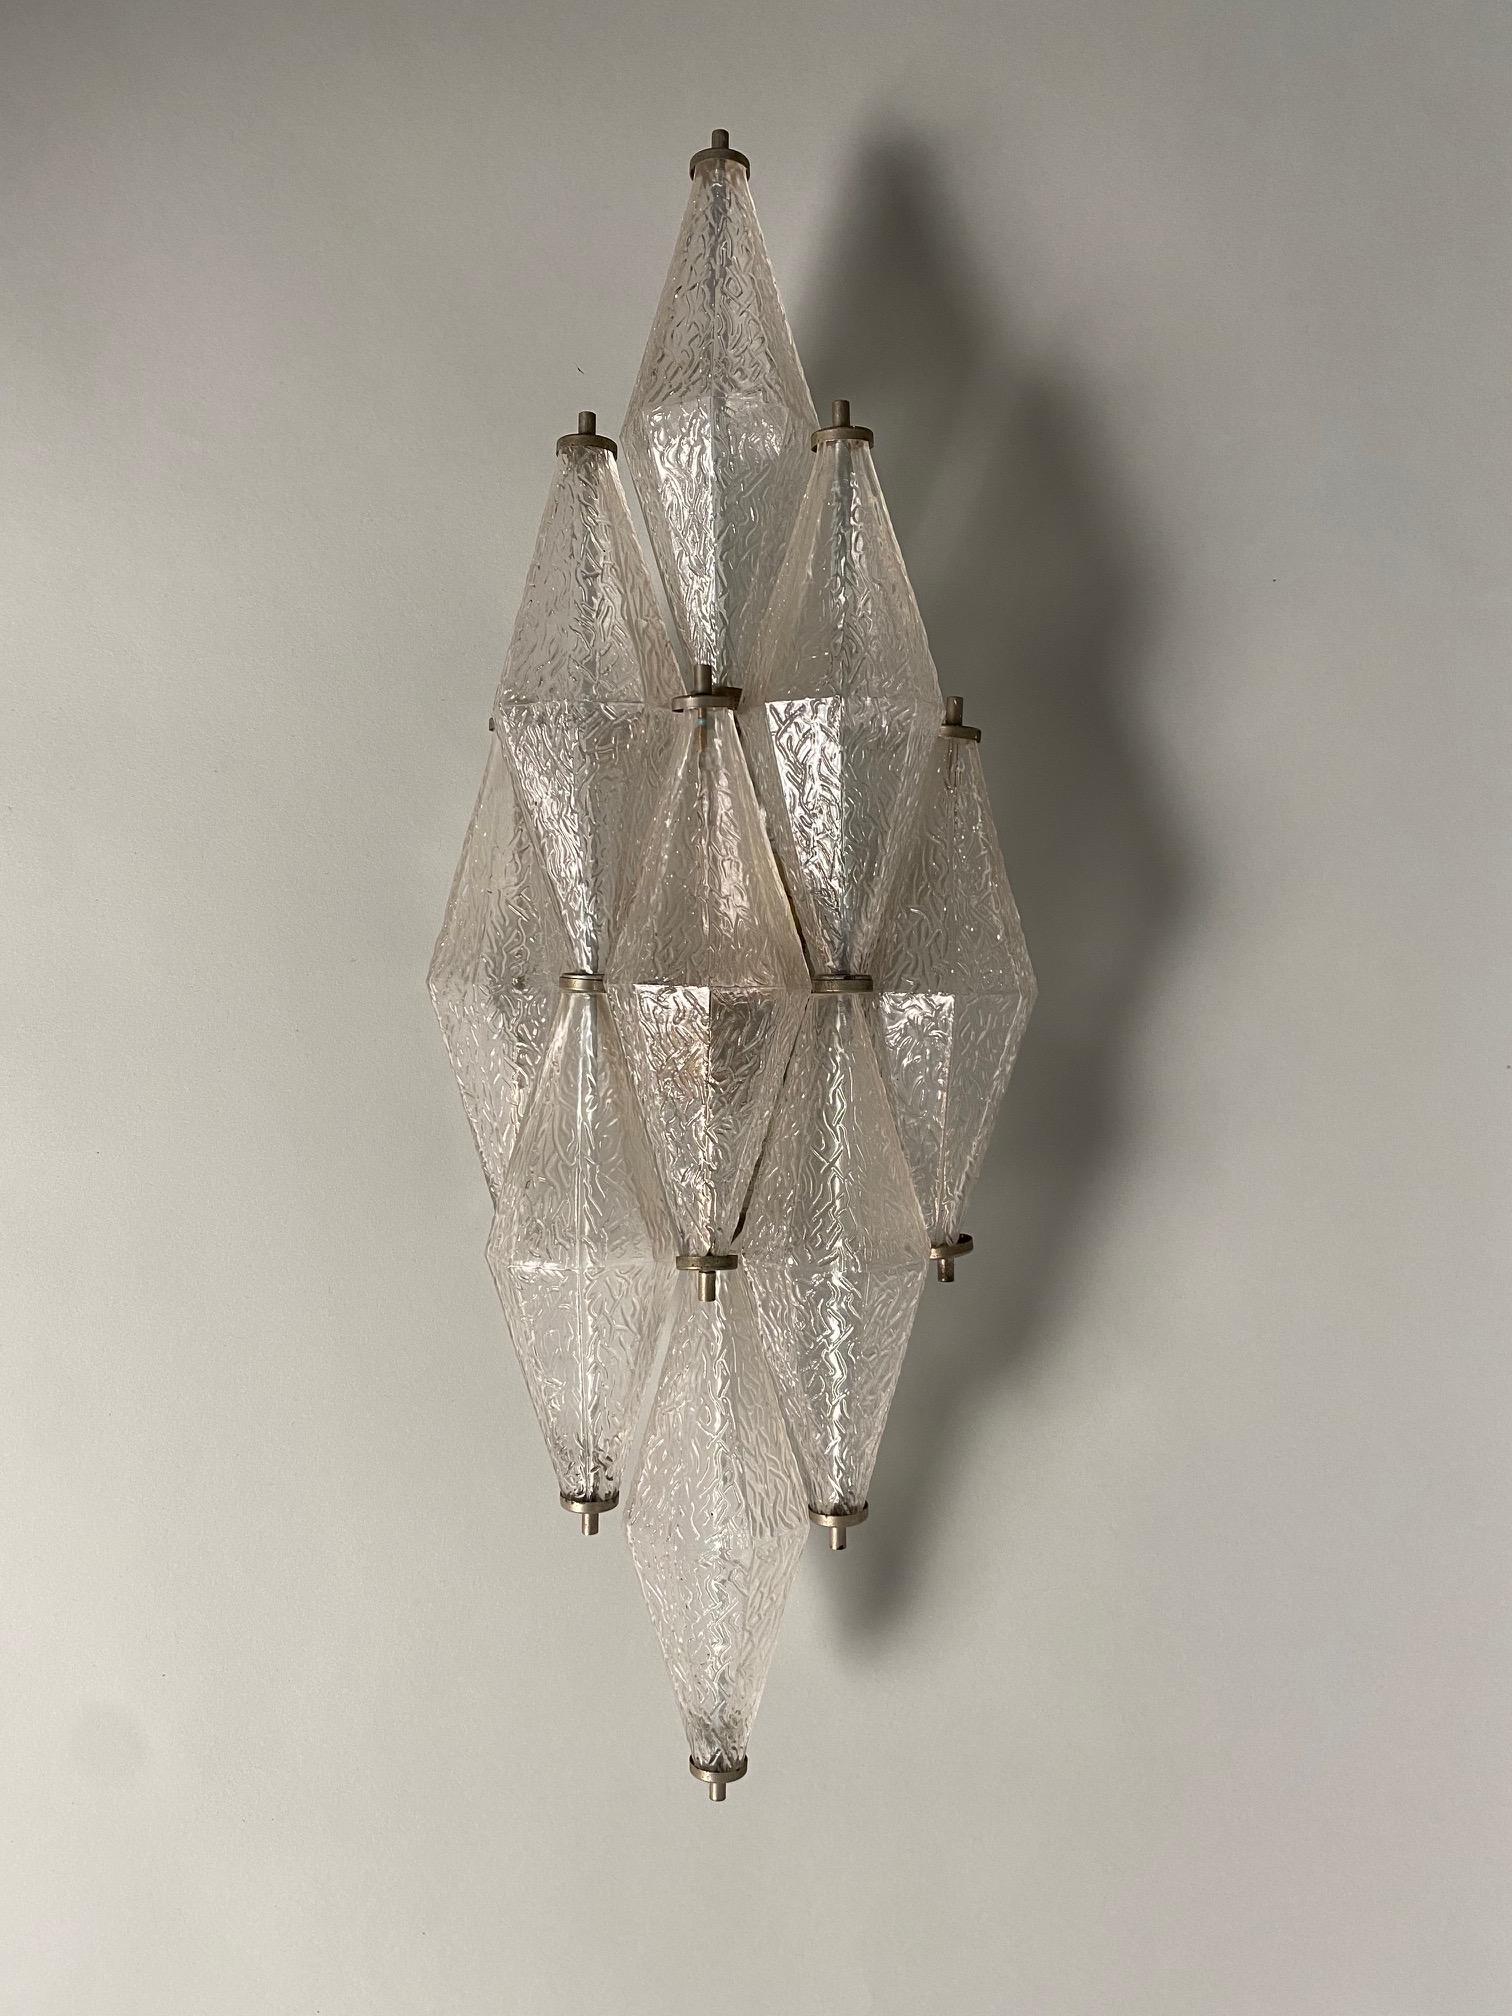 Set of three large Murano glass sconces attributed to the Italian designer and architect Carlo Scarpa.